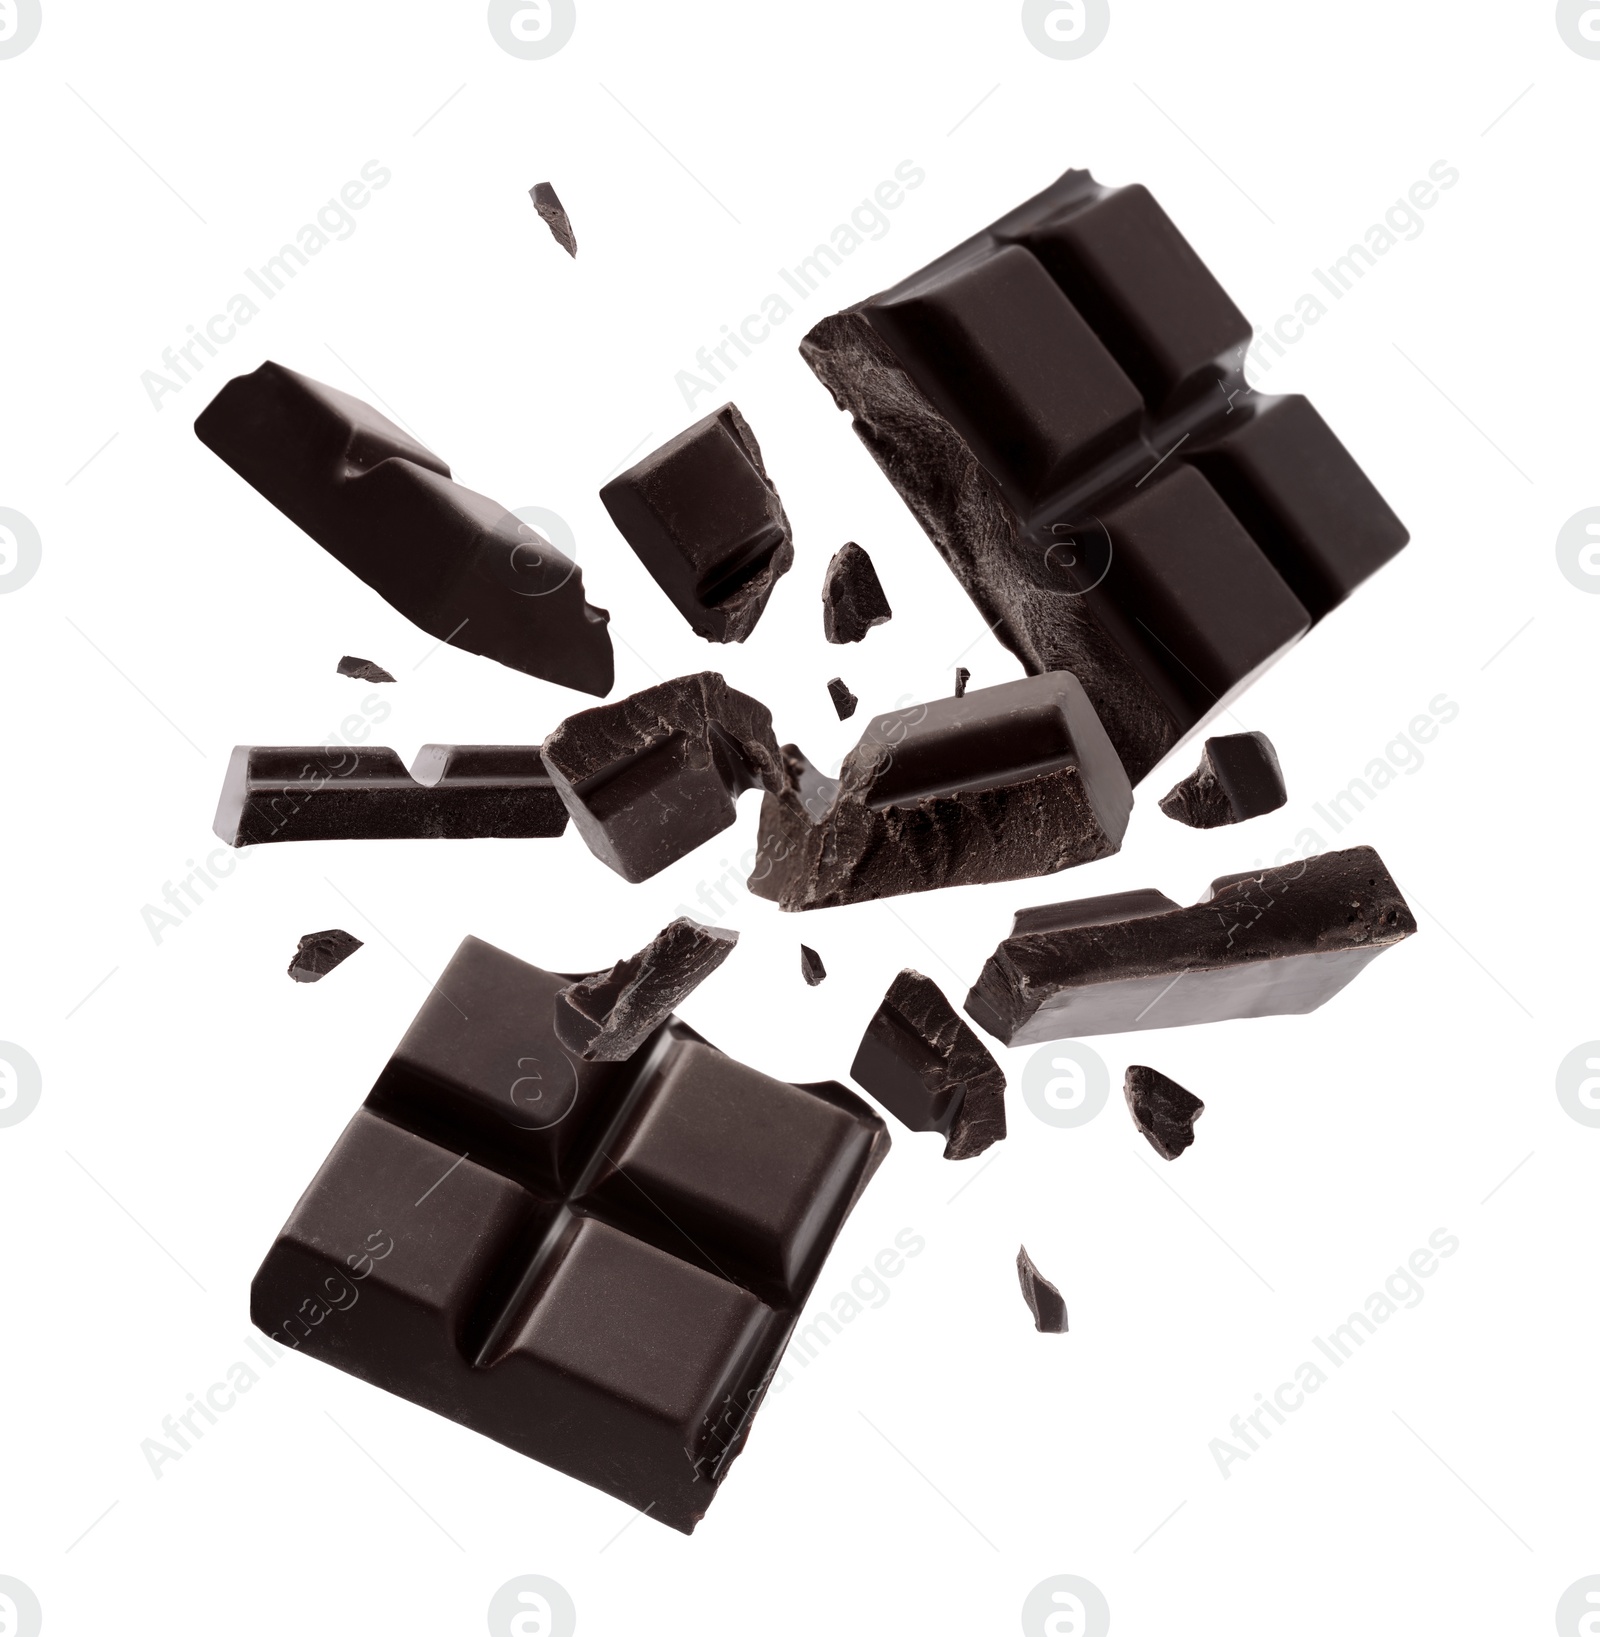 Image of Dark chocolate explosion, pieces shattering on white background